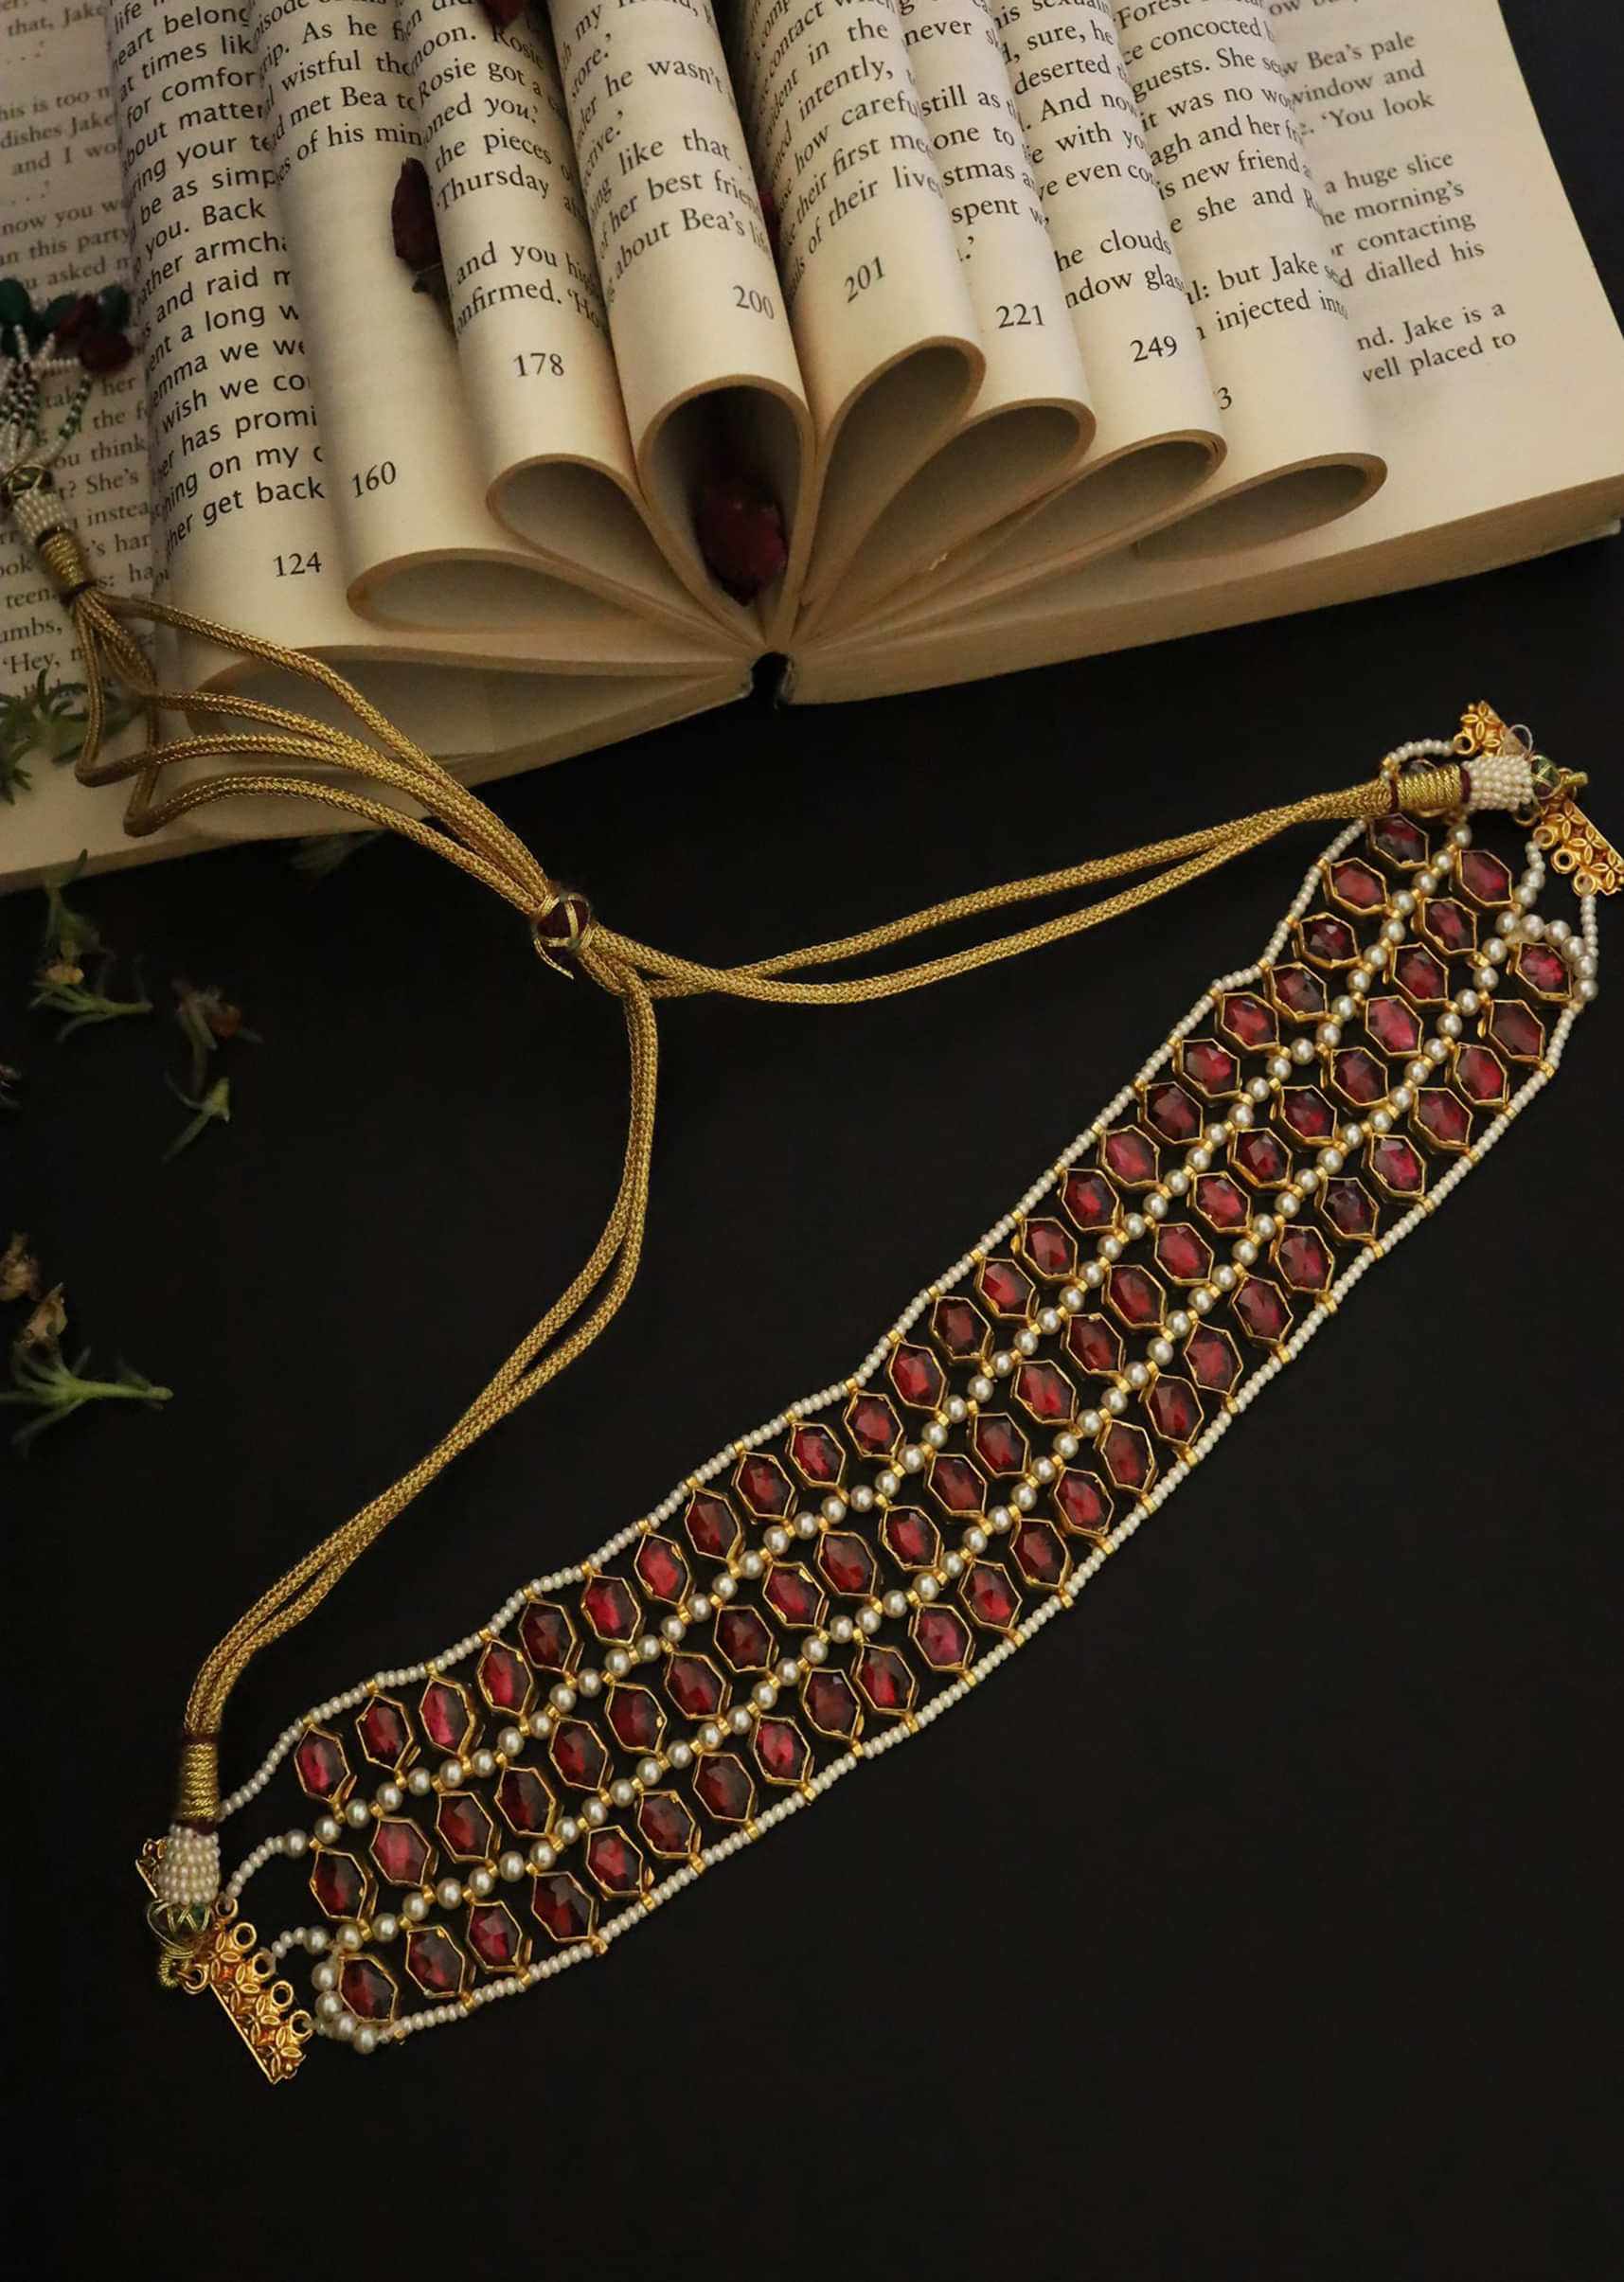 Red And Gold Choker Necklace With Four Rows Of Pearls And Hexagon Shaped Red Stones By Paisley Pop